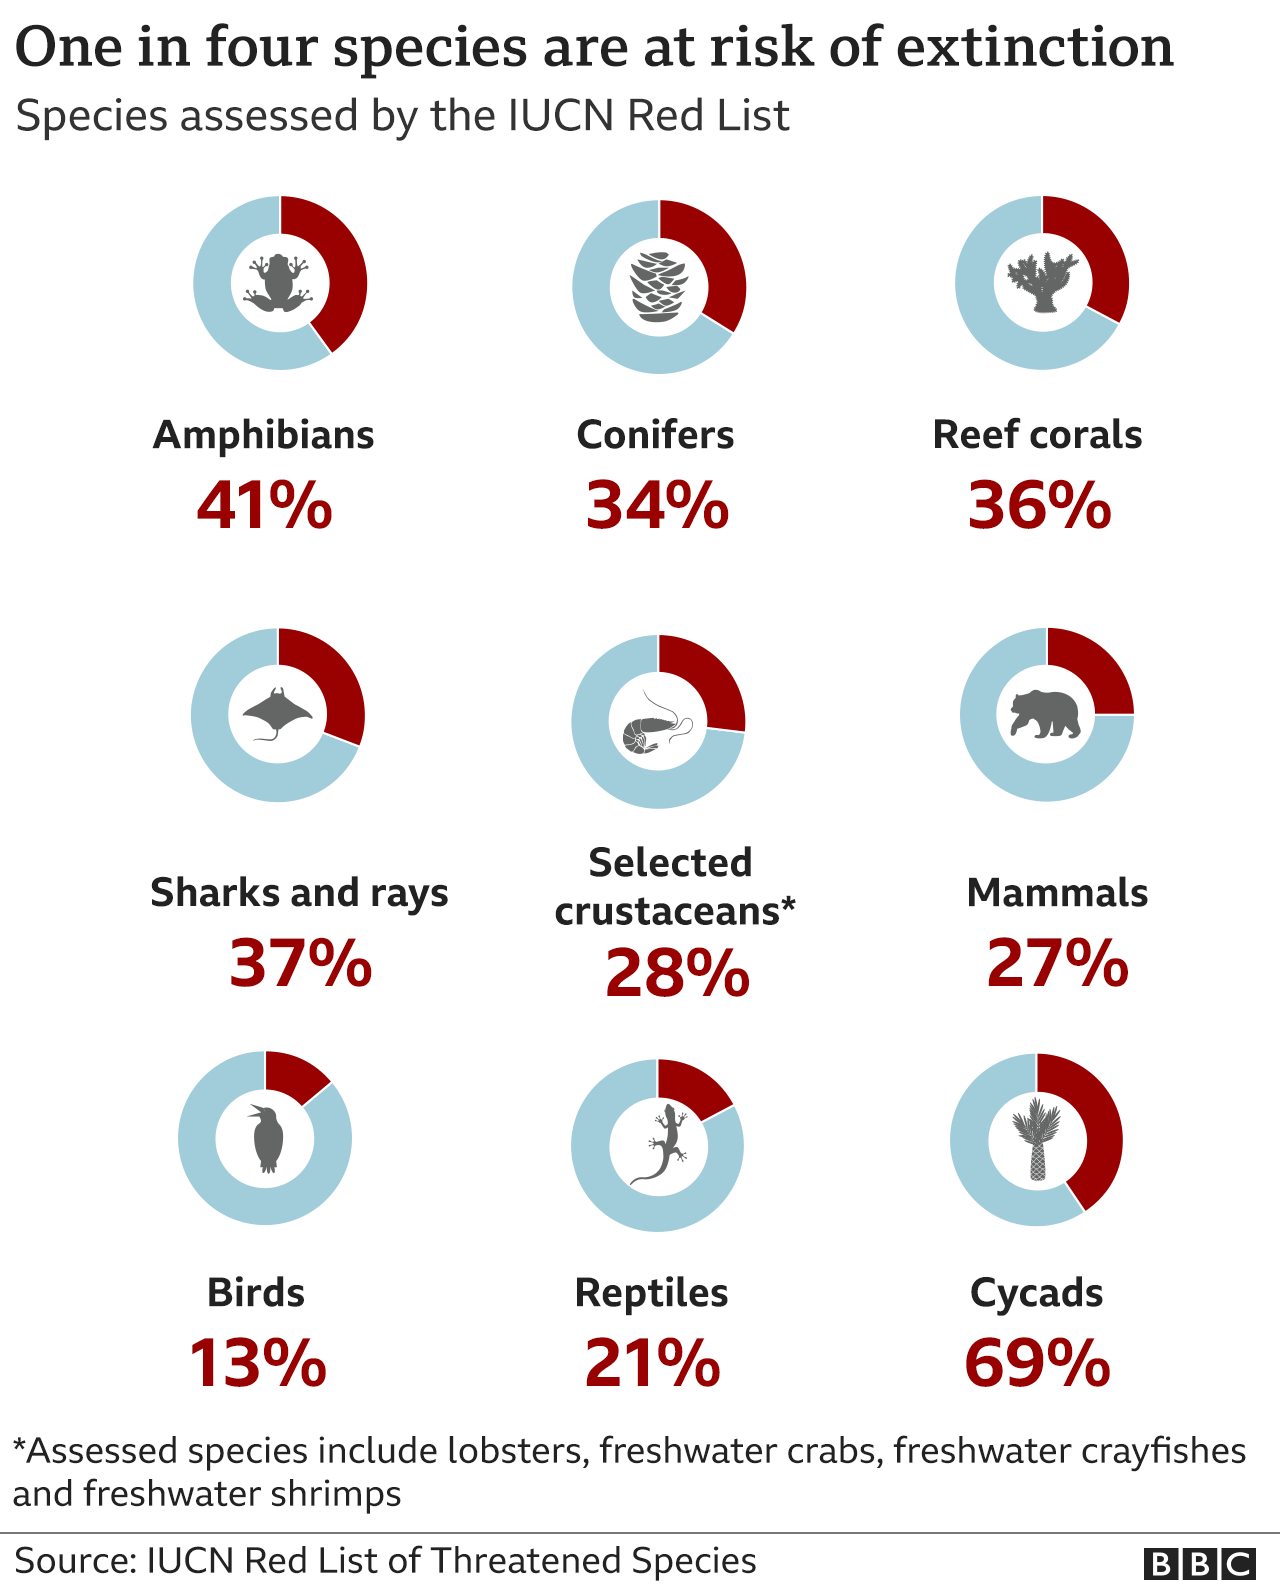 Graphic showing how more than one in four species of those assessed by the IUCN Red List are at risk of extinction, including 41% of amphibians, 27% of mammals and 13% of birds